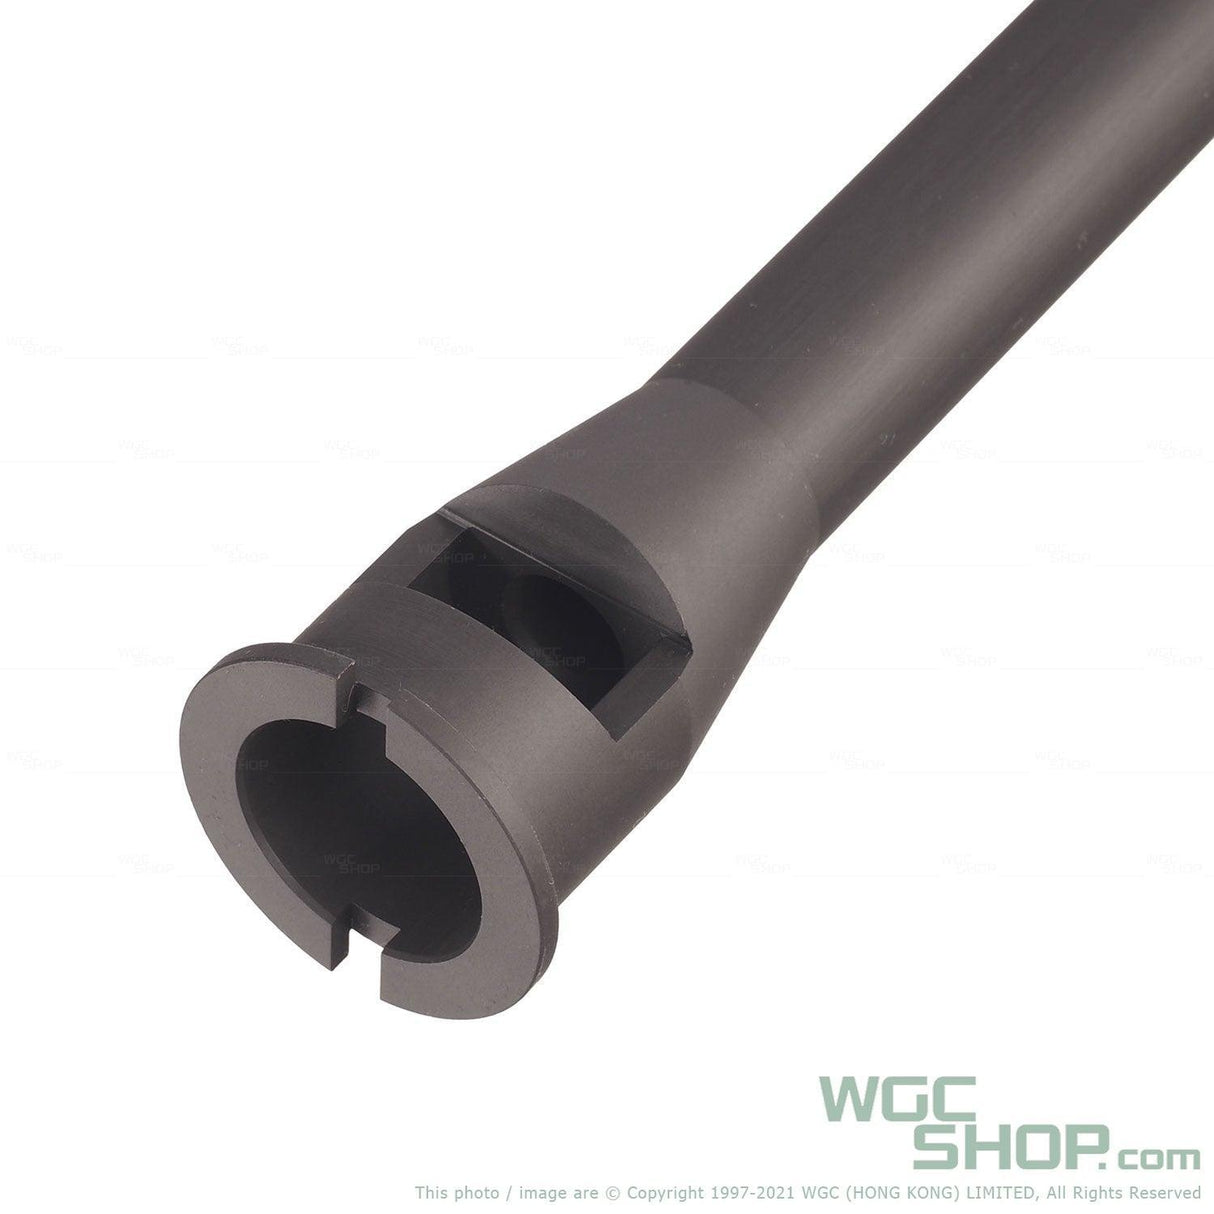 dnA 14.5 Inch Steel Outer Barrel for VFC / DNA GBB Airsoft - GOV Profile - WGC Shop